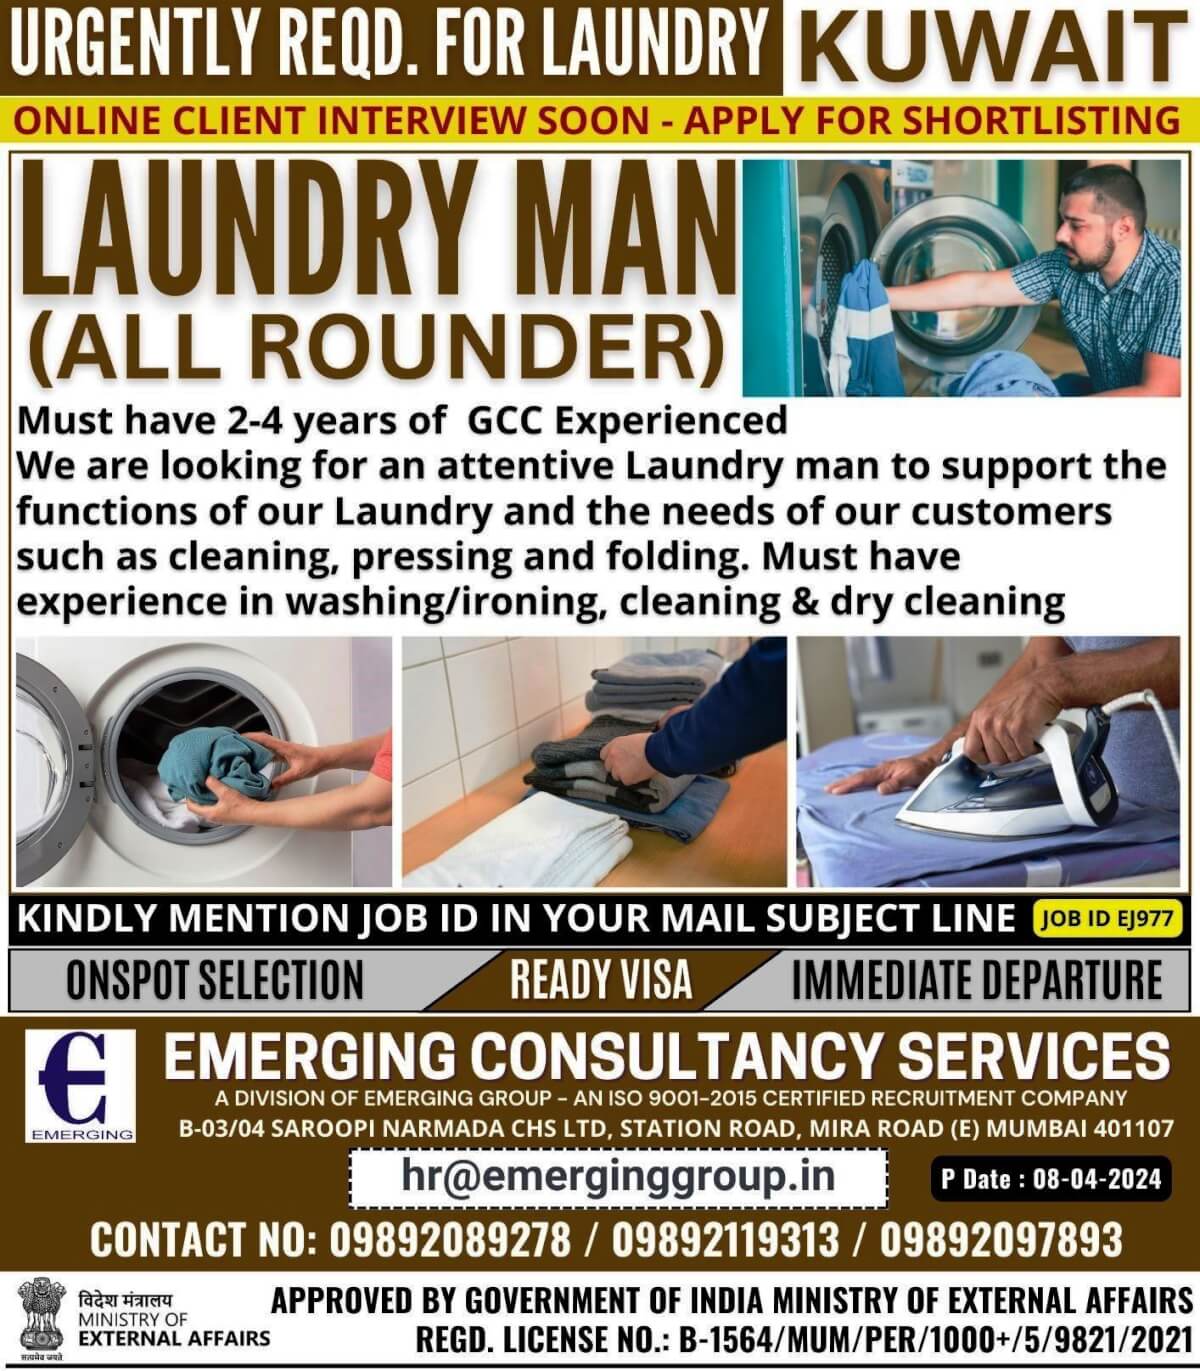 ONLINE CLIENT INTERVIEW SOON - APPLY FOR SHORTLISTING - LAUNDRY MAN